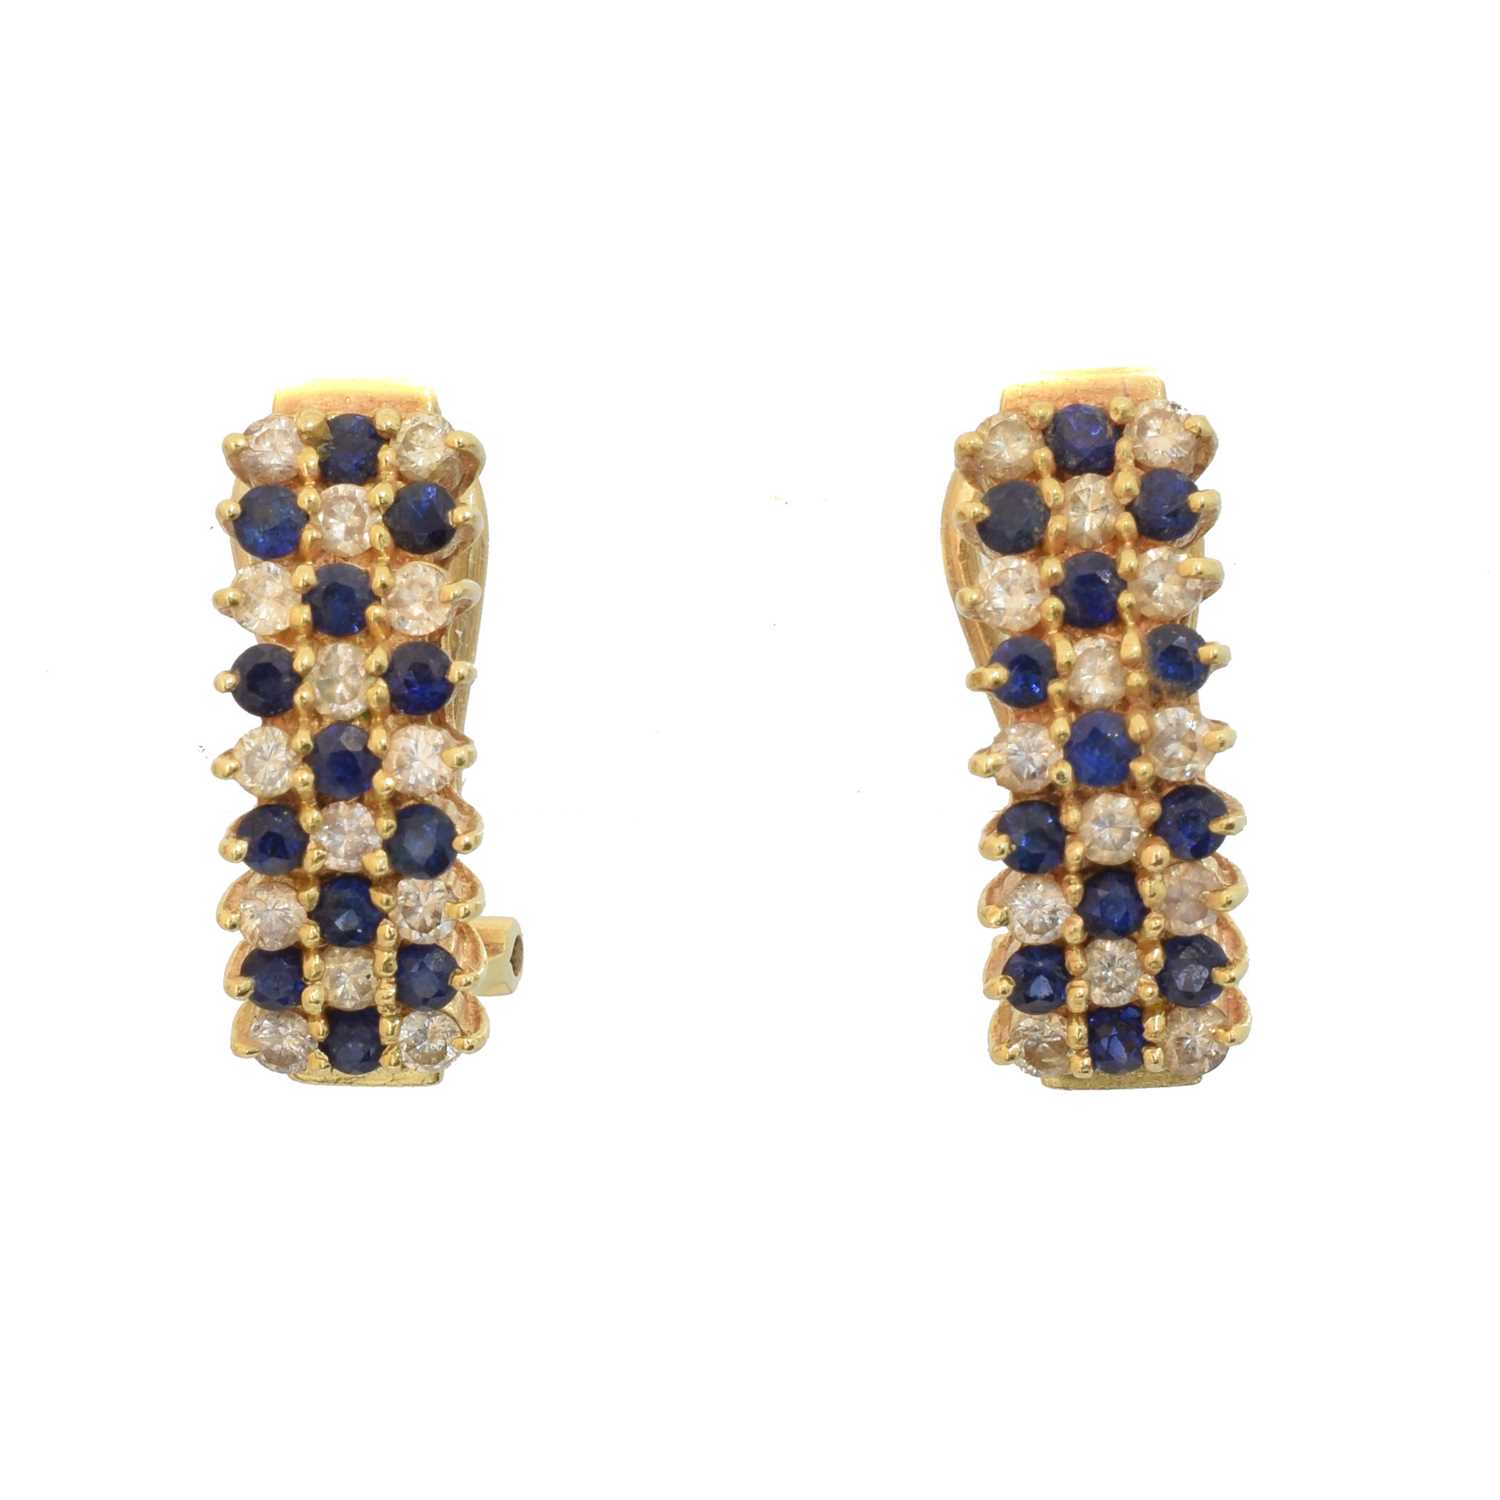 Lot A pair of sapphire and diamond earrings